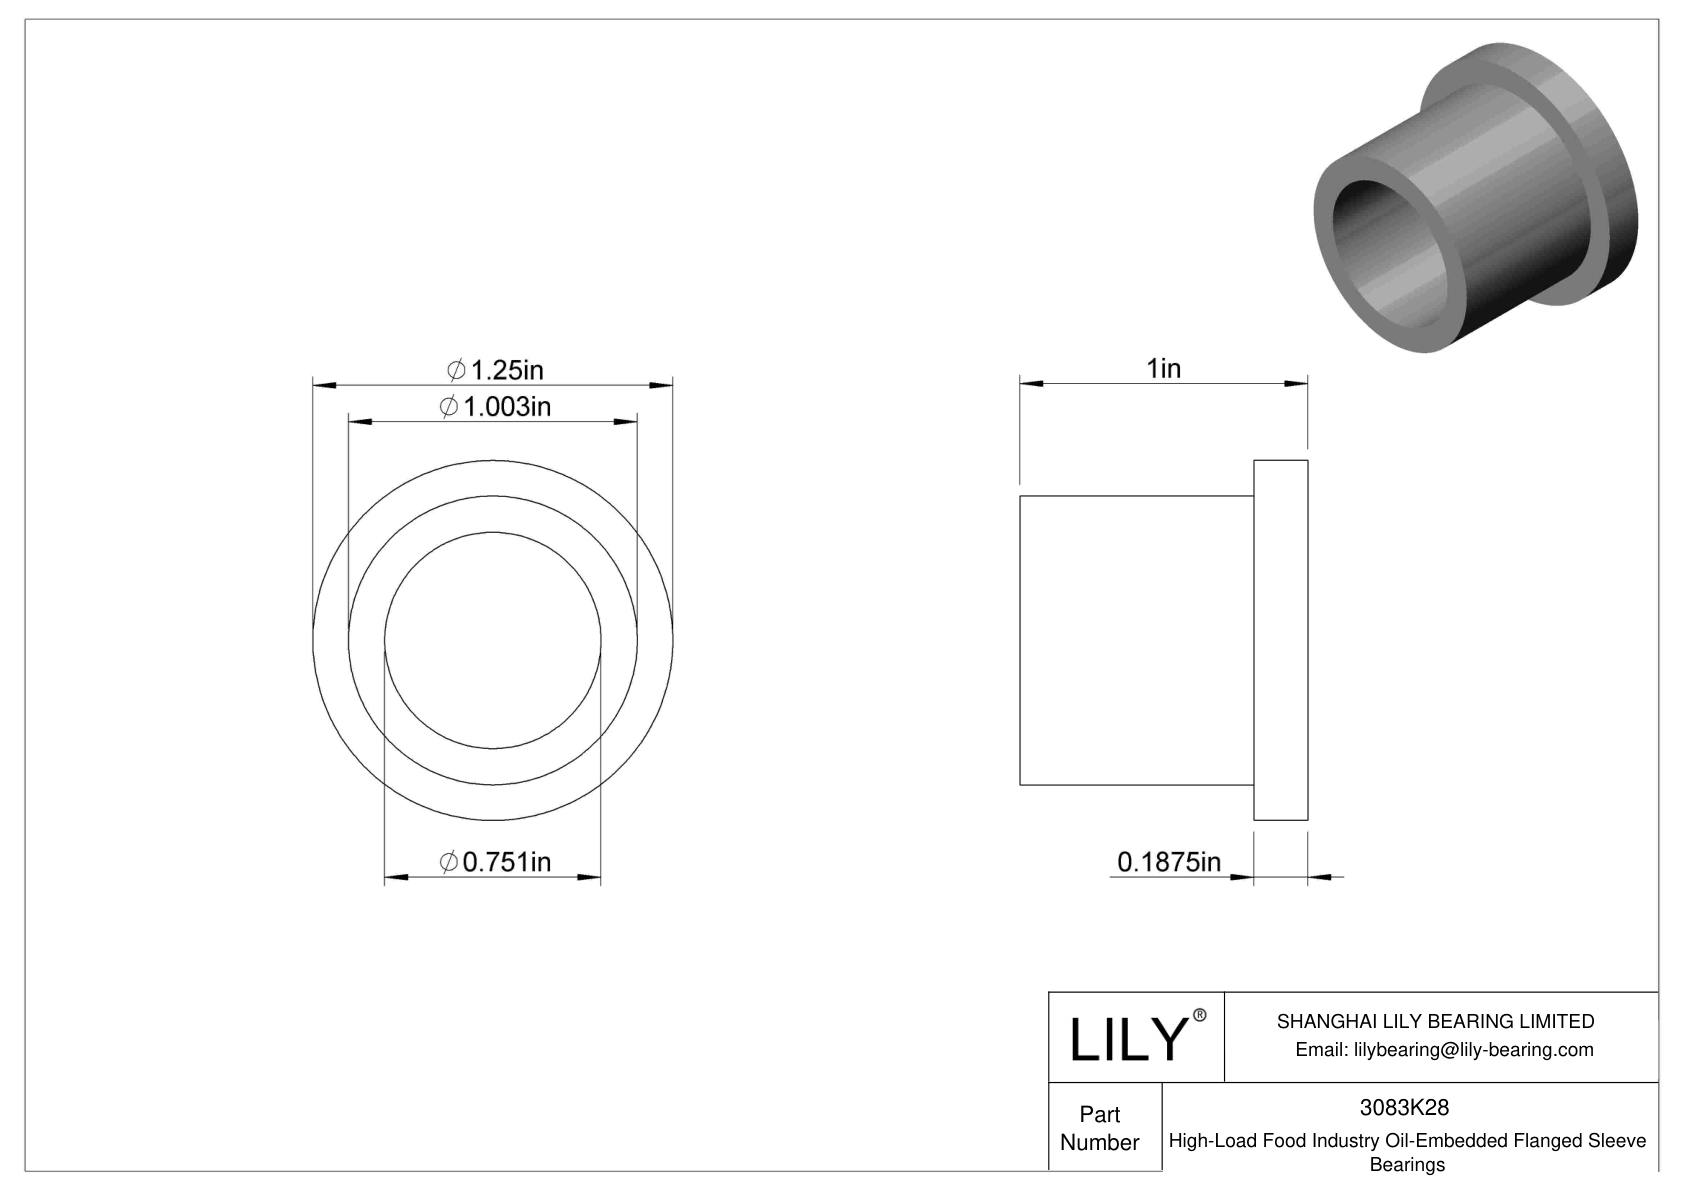 DAIDKCI High-Load Food Industry Oil-Embedded Flanged Sleeve Bearings cad drawing